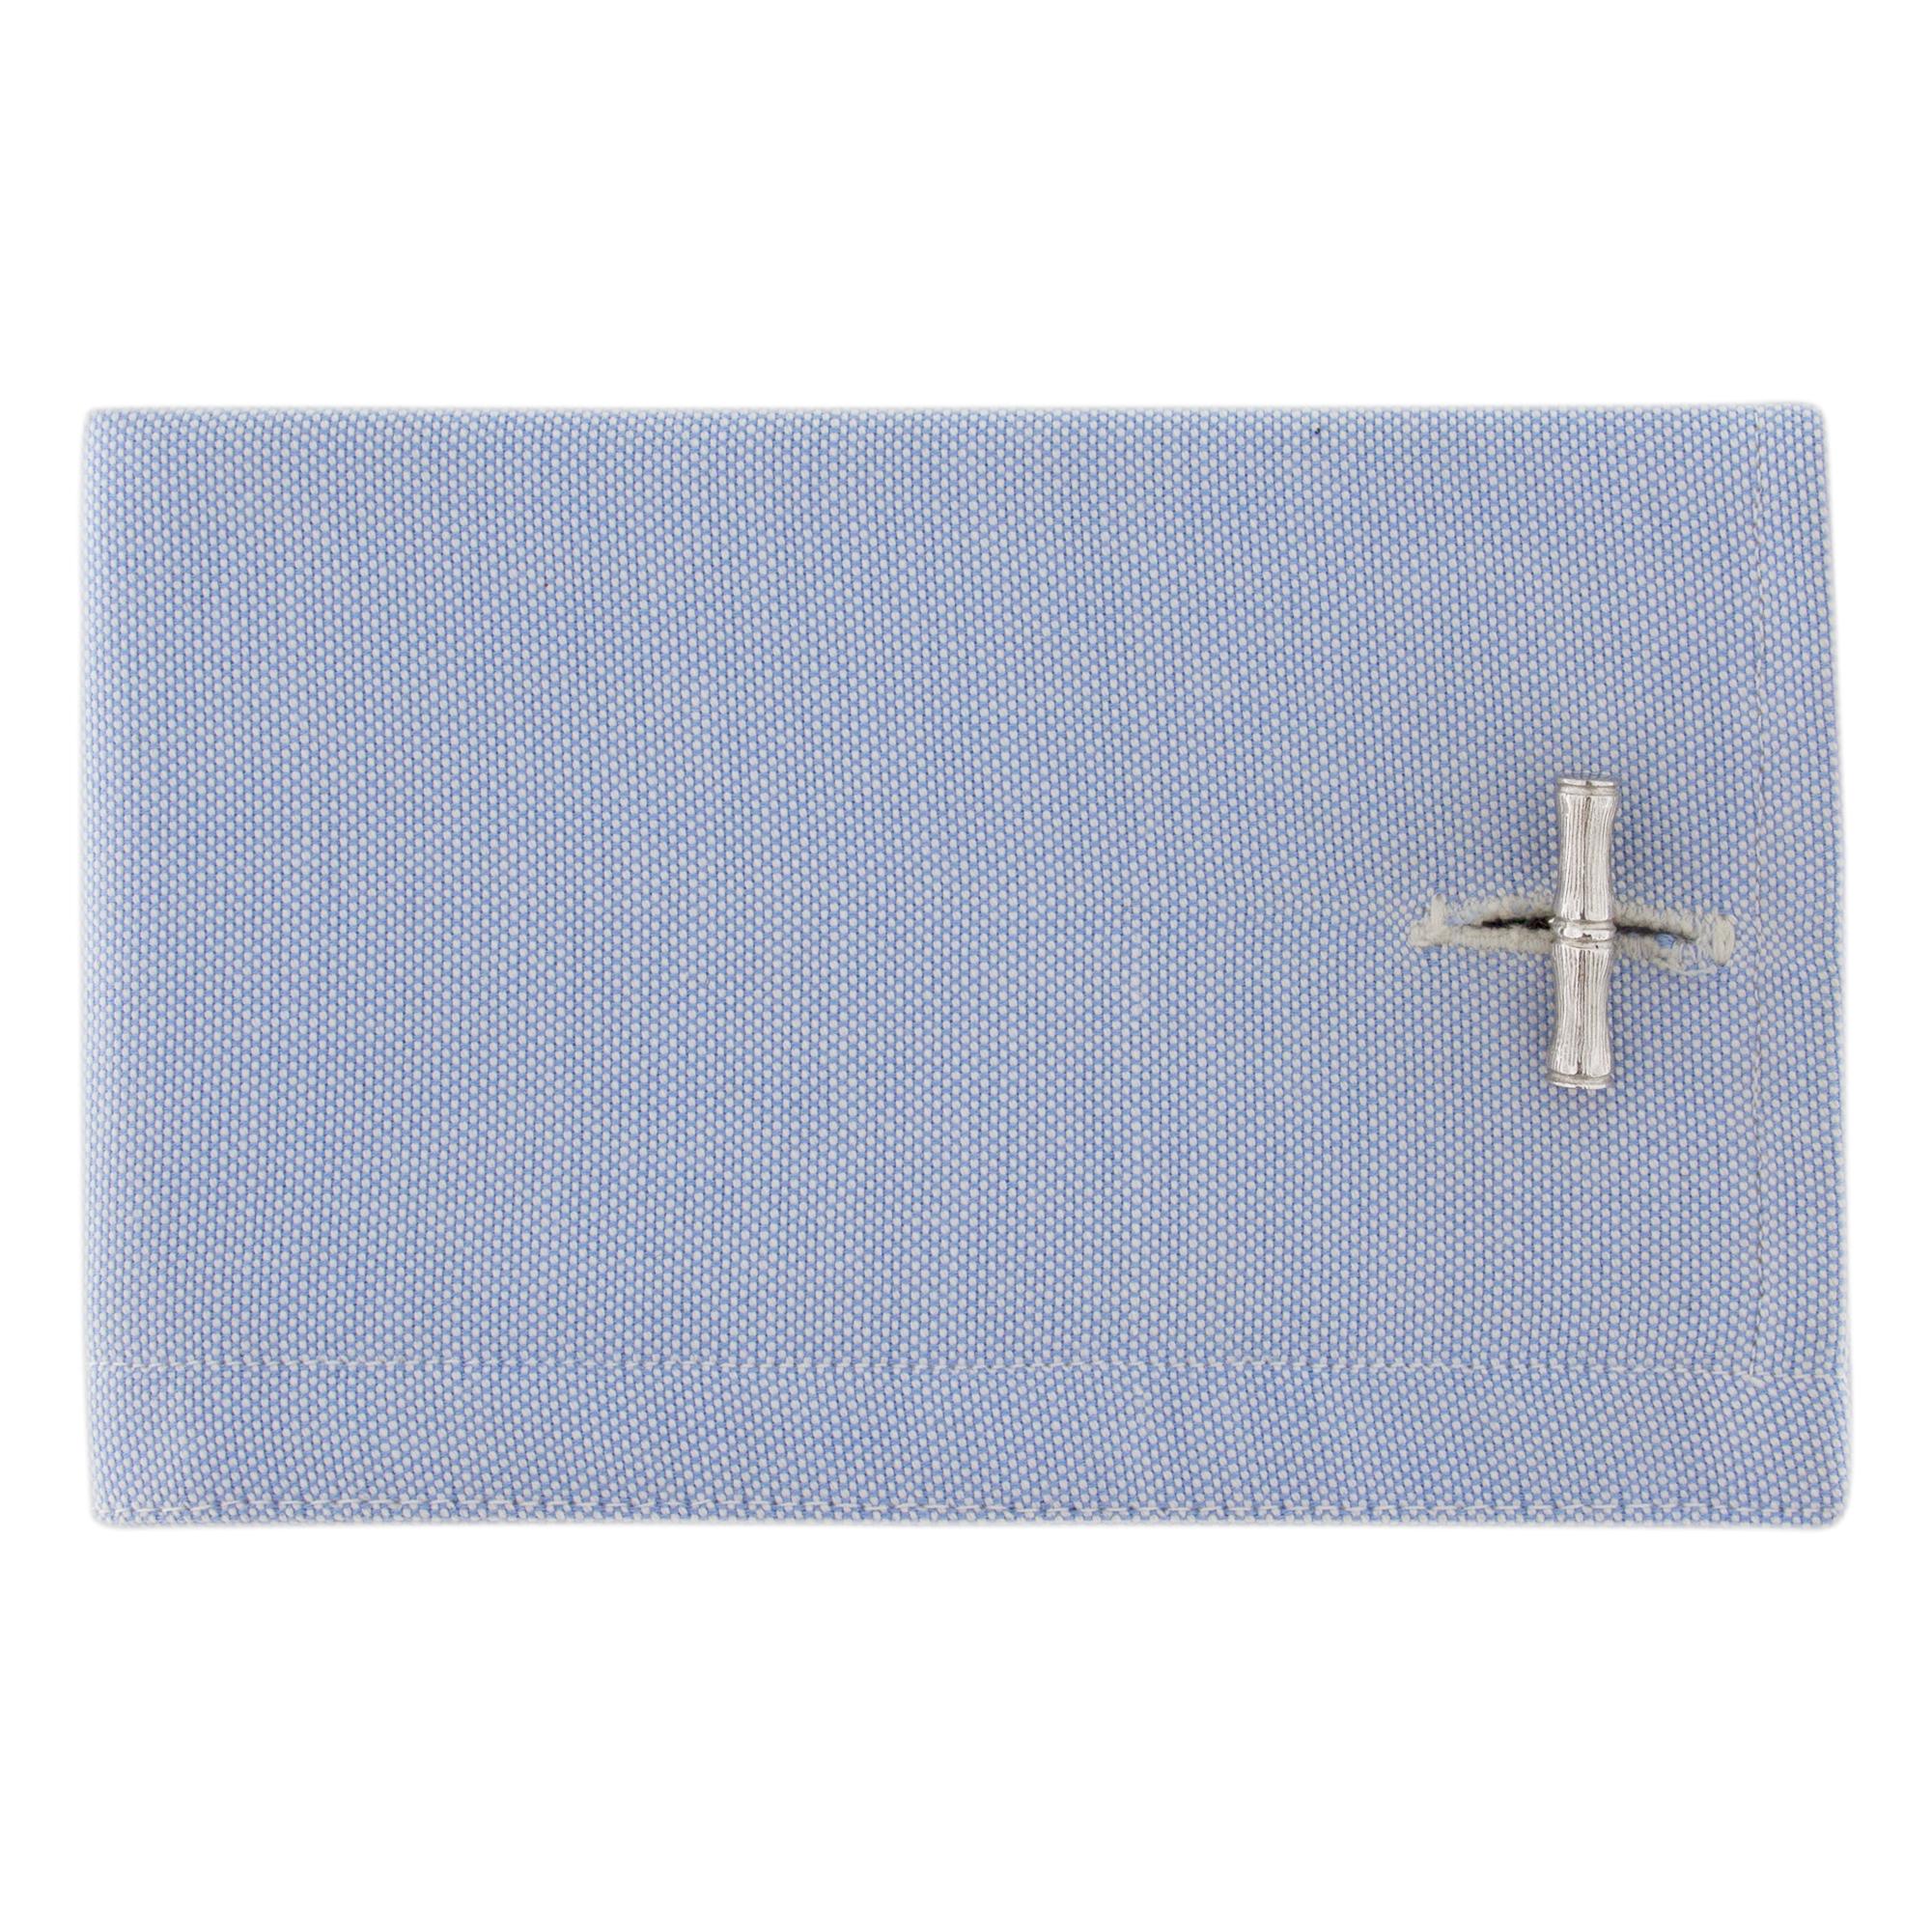 Jona design collection, hand crafted in Italy, sterling silver bamboo bar cufflinks. Marked JONA 925
All Jona jewelry is new and has never been previously owned or worn. Each item will arrive at your door beautifully gift wrapped in Jona boxes, put